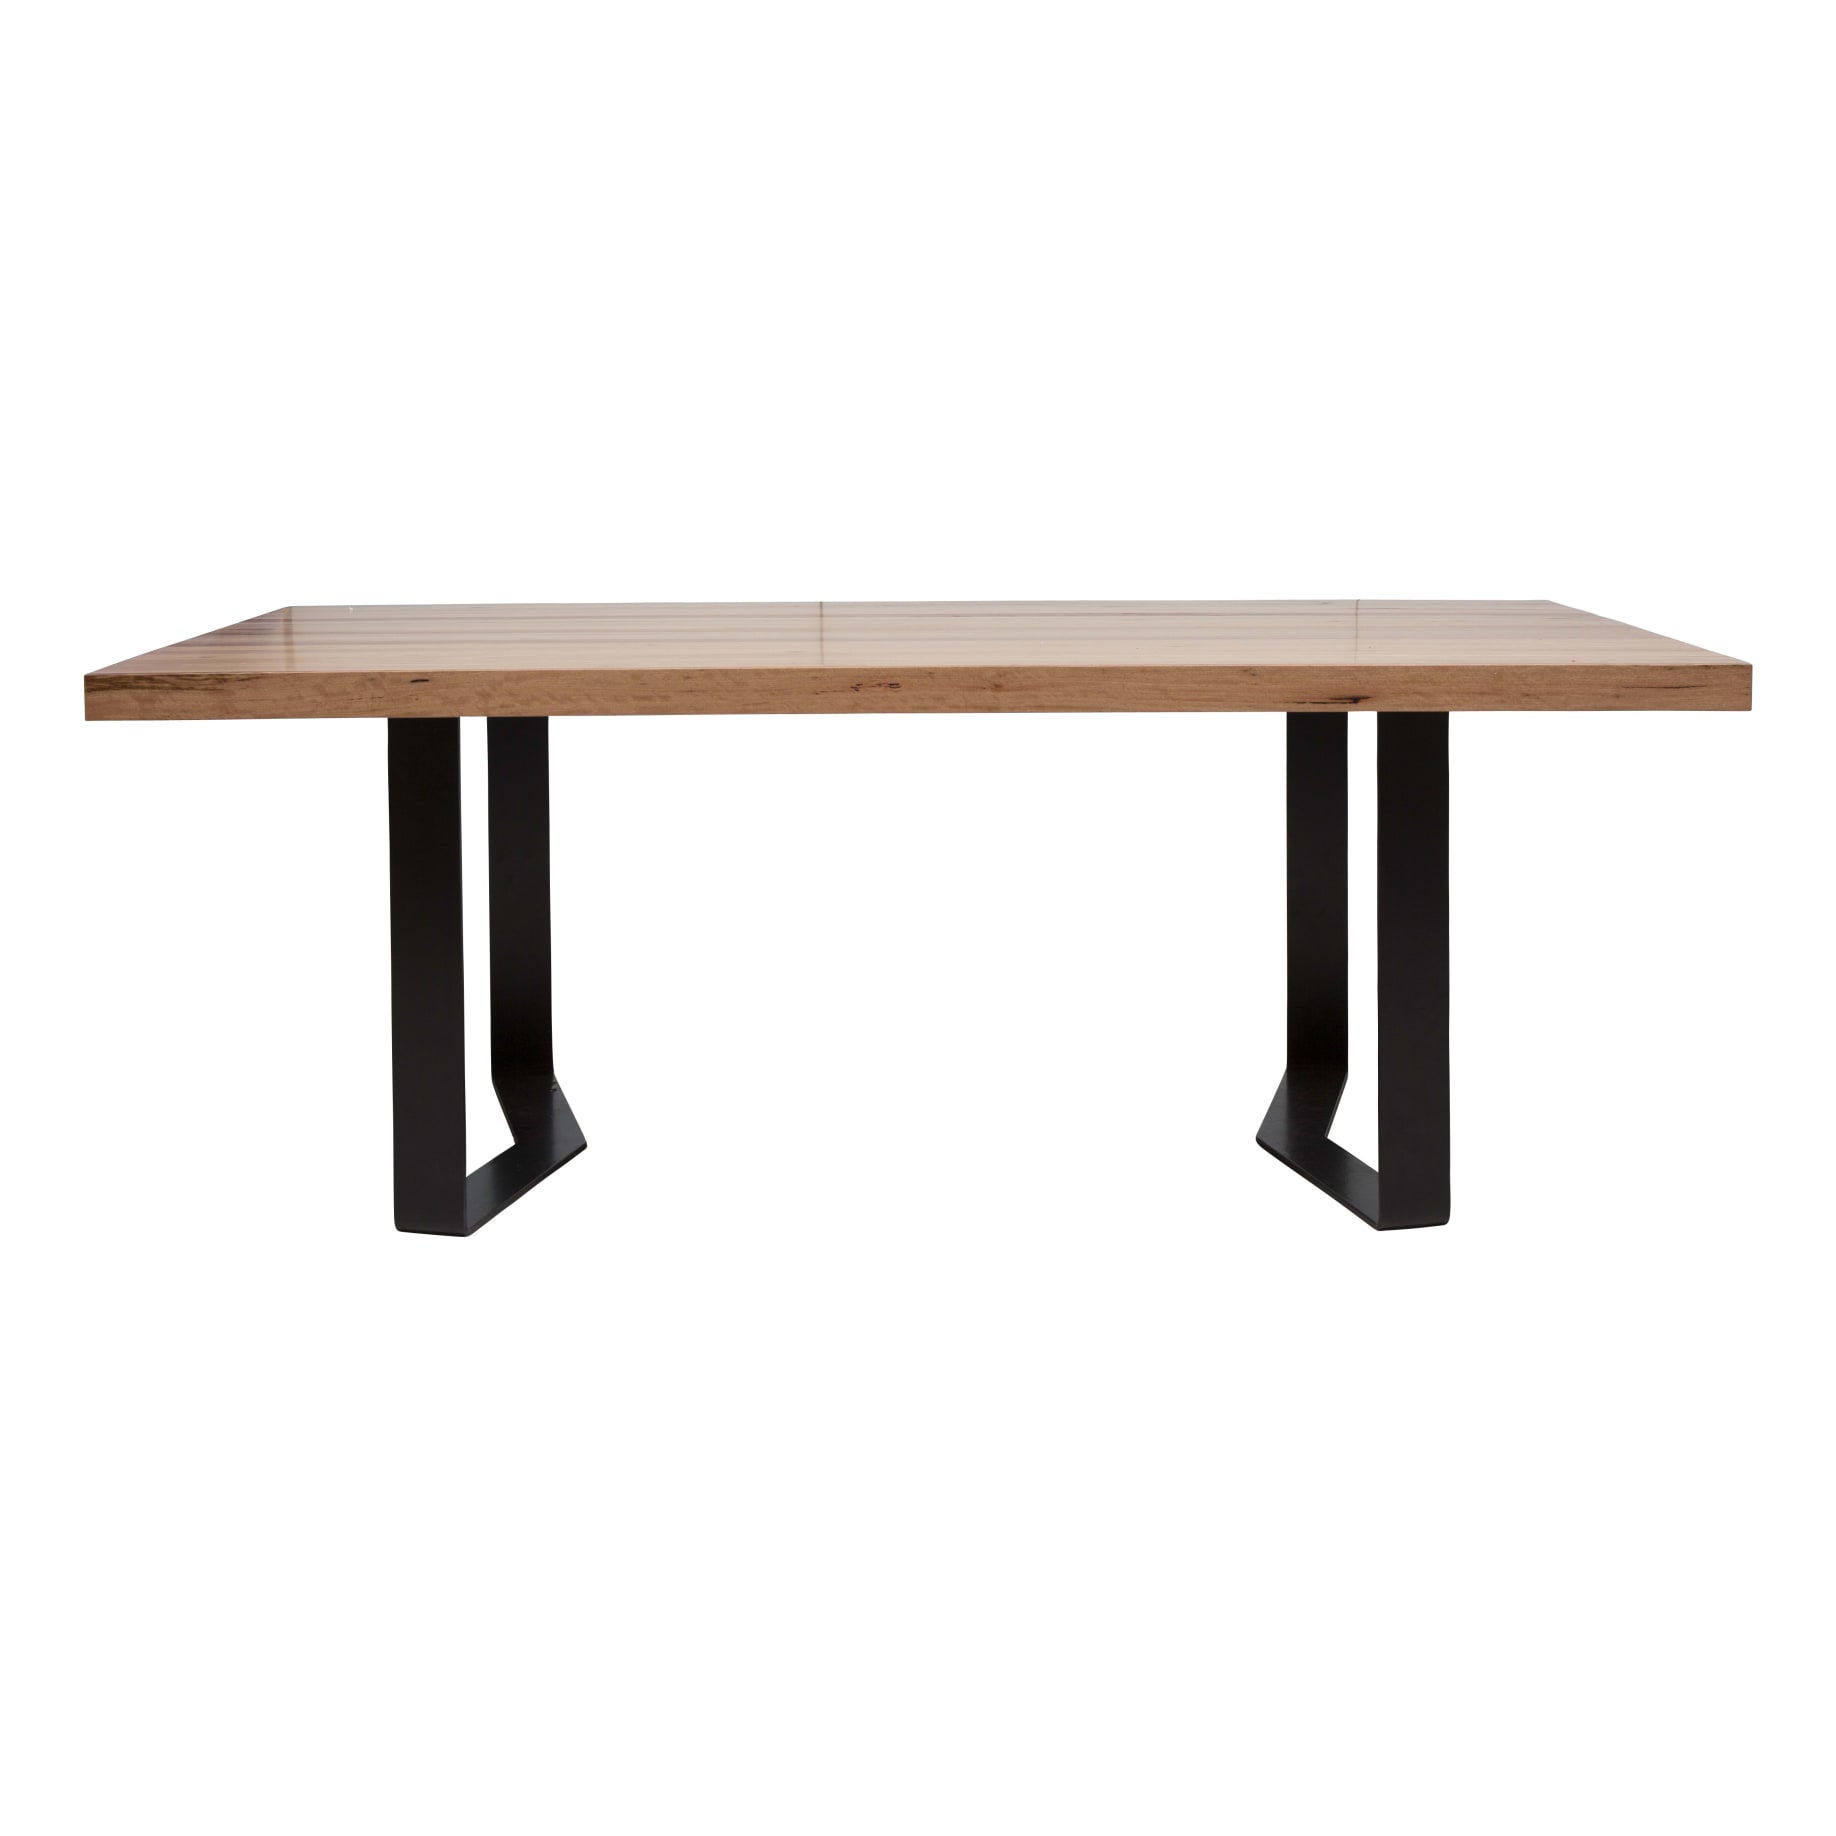 Abbey Dining Table 180cm in Australian Timbers